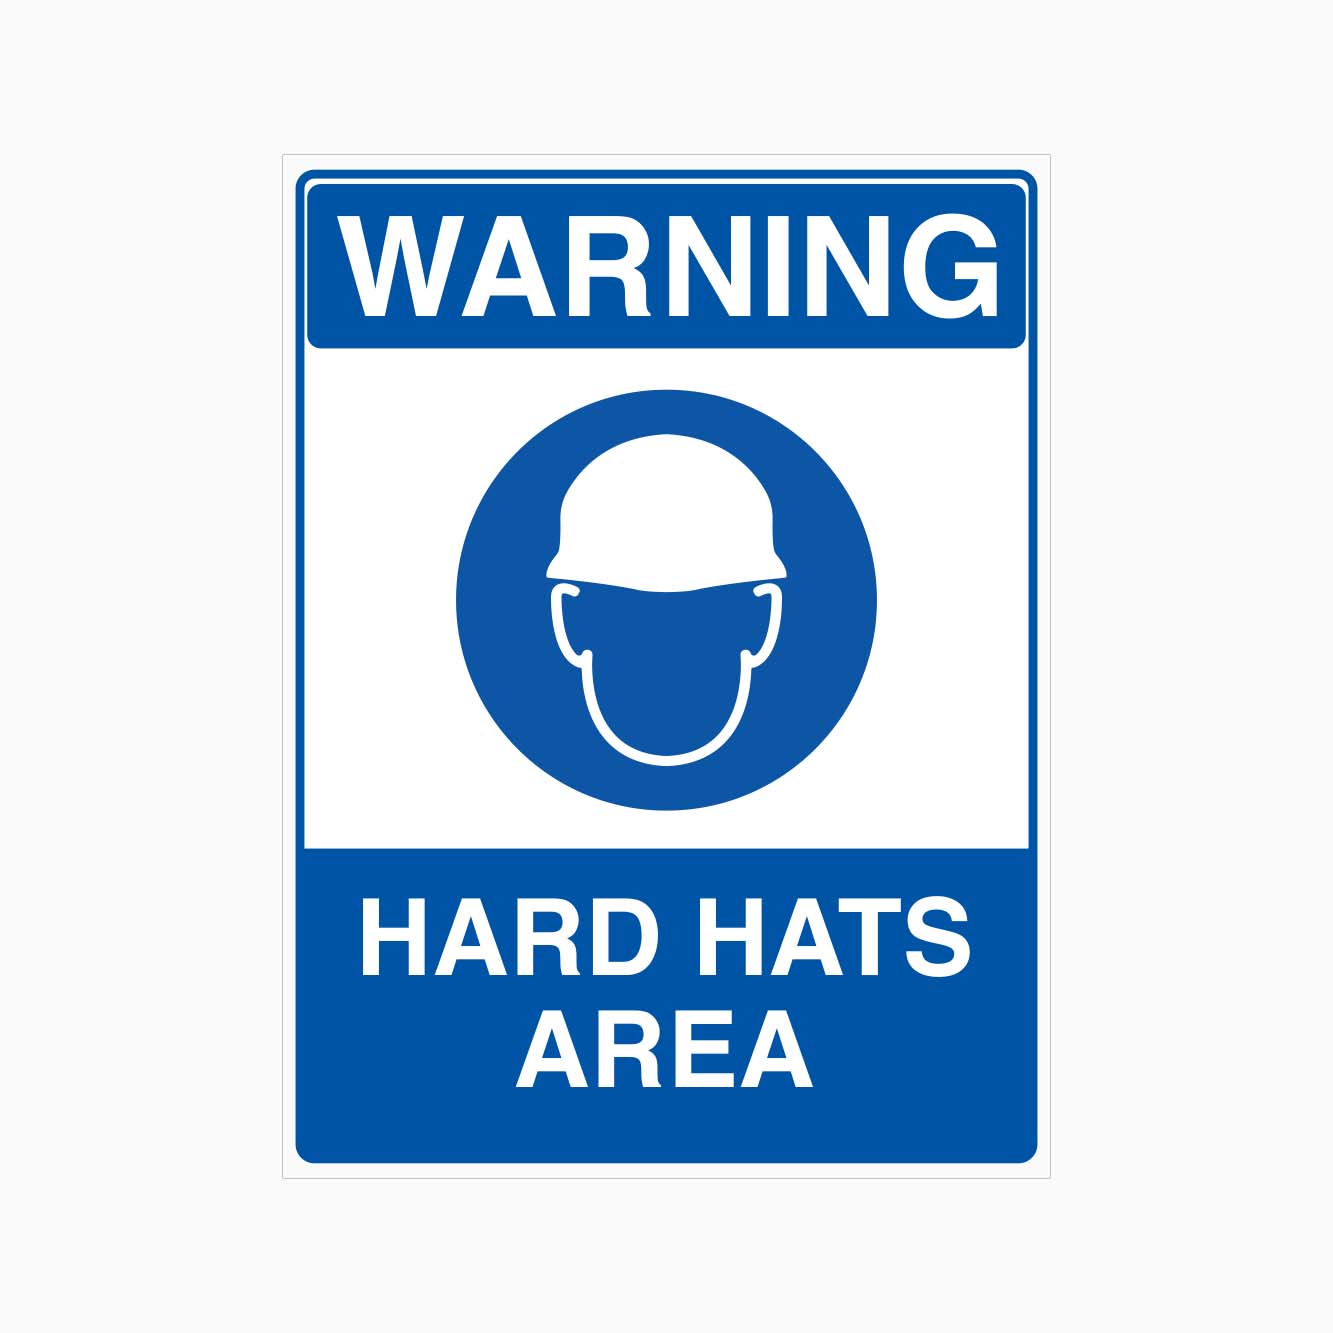 WARNING HARD HAT AREA SIGN - GET SIGNS